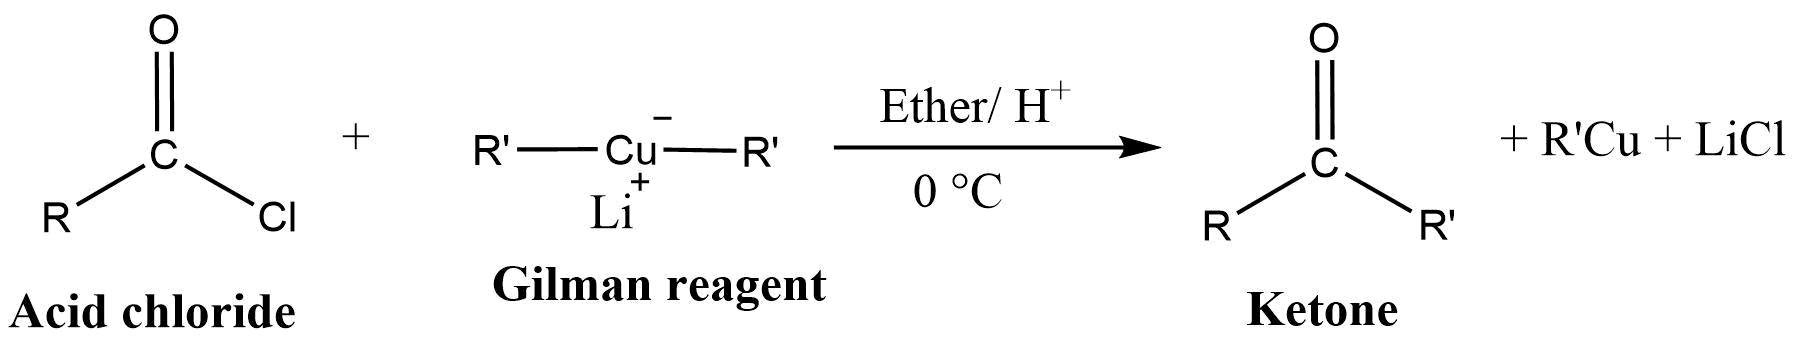 Reaction of Gilman reagent with acid chloride